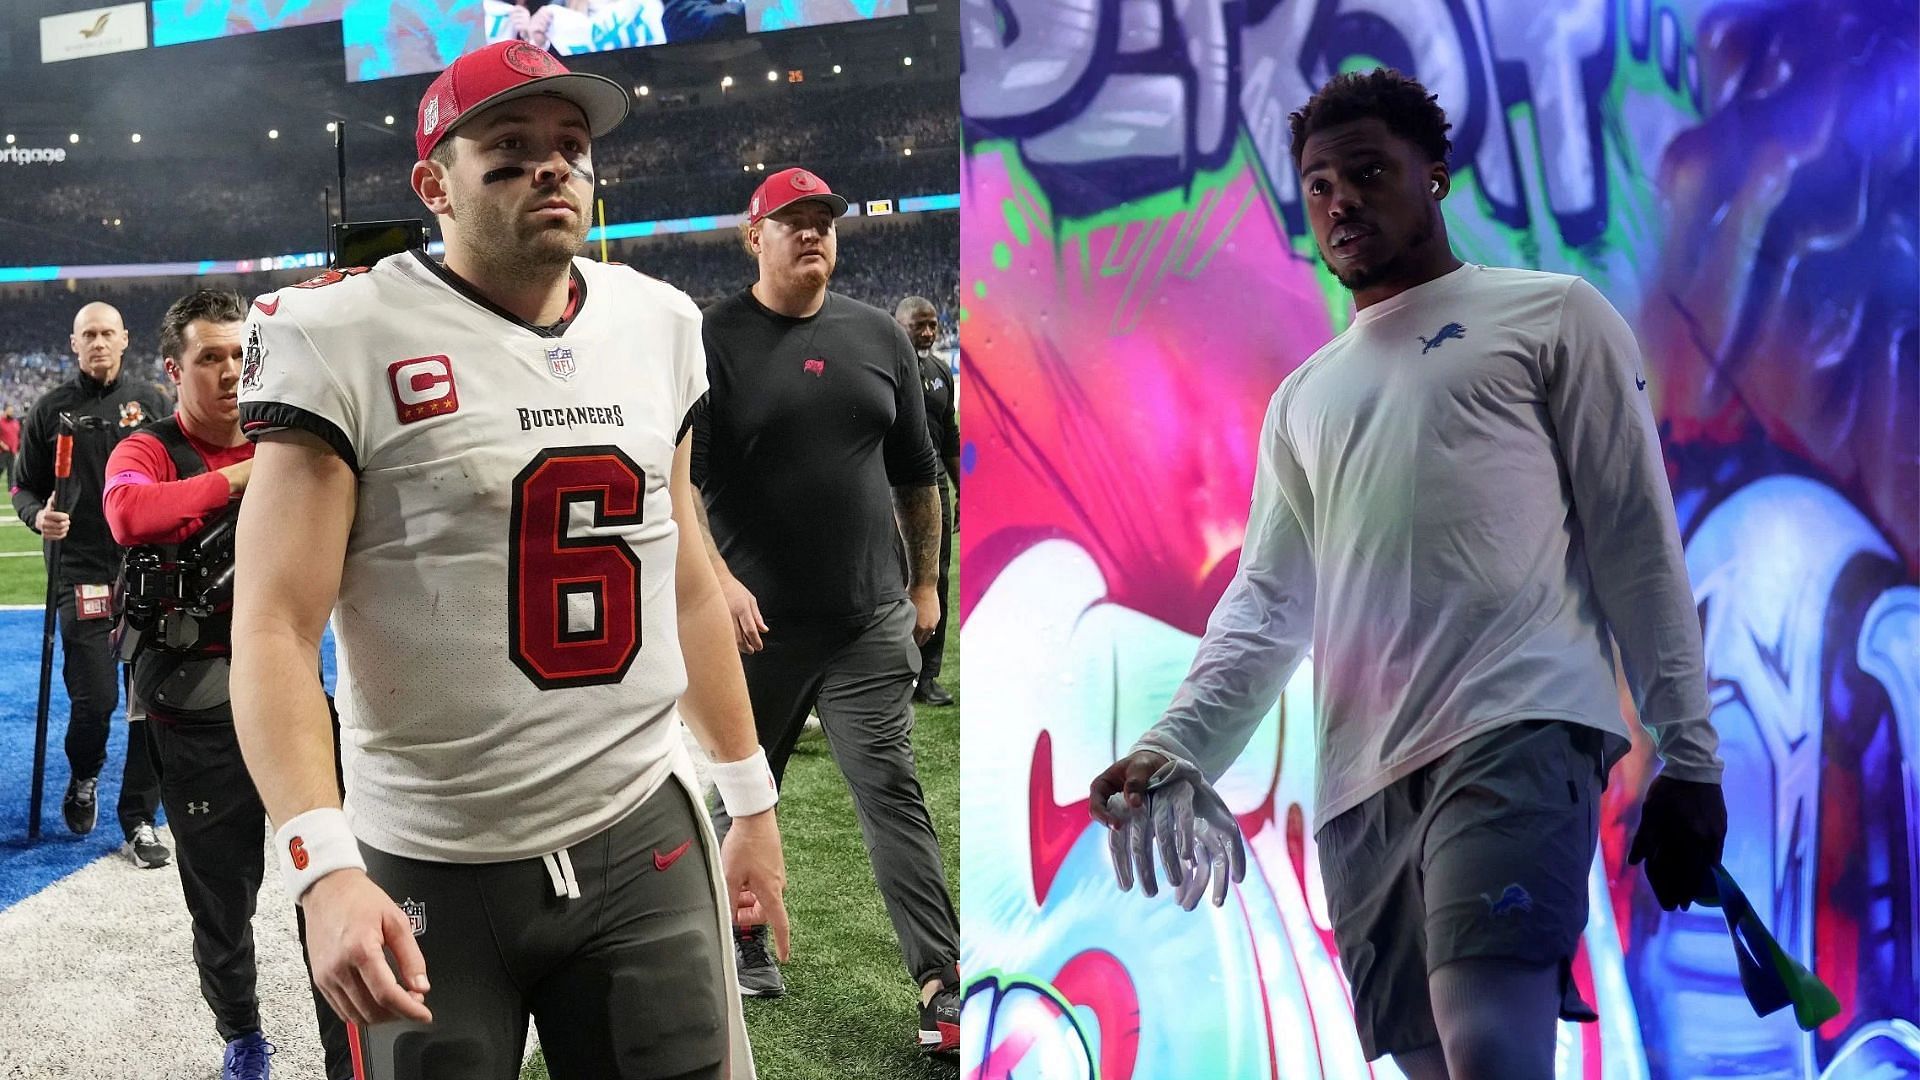 Baker Mayfield and CJ Gardner Johnson were quite heated against each other on Sunday